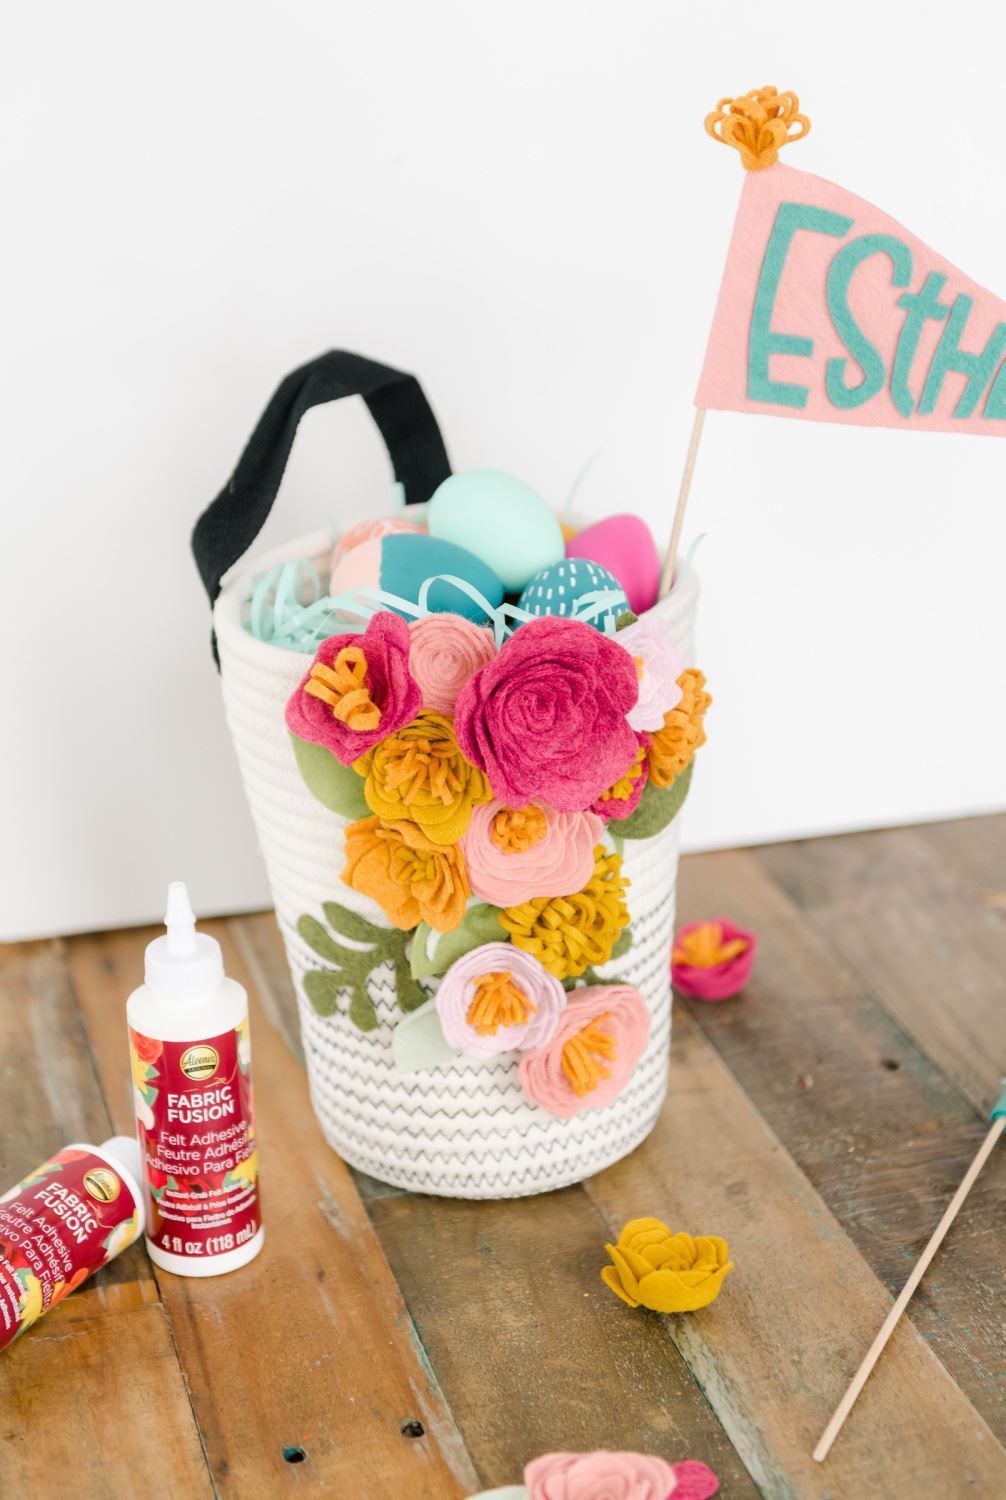 DIY Easter Basket with Felt Flowers and Personalized Pennants